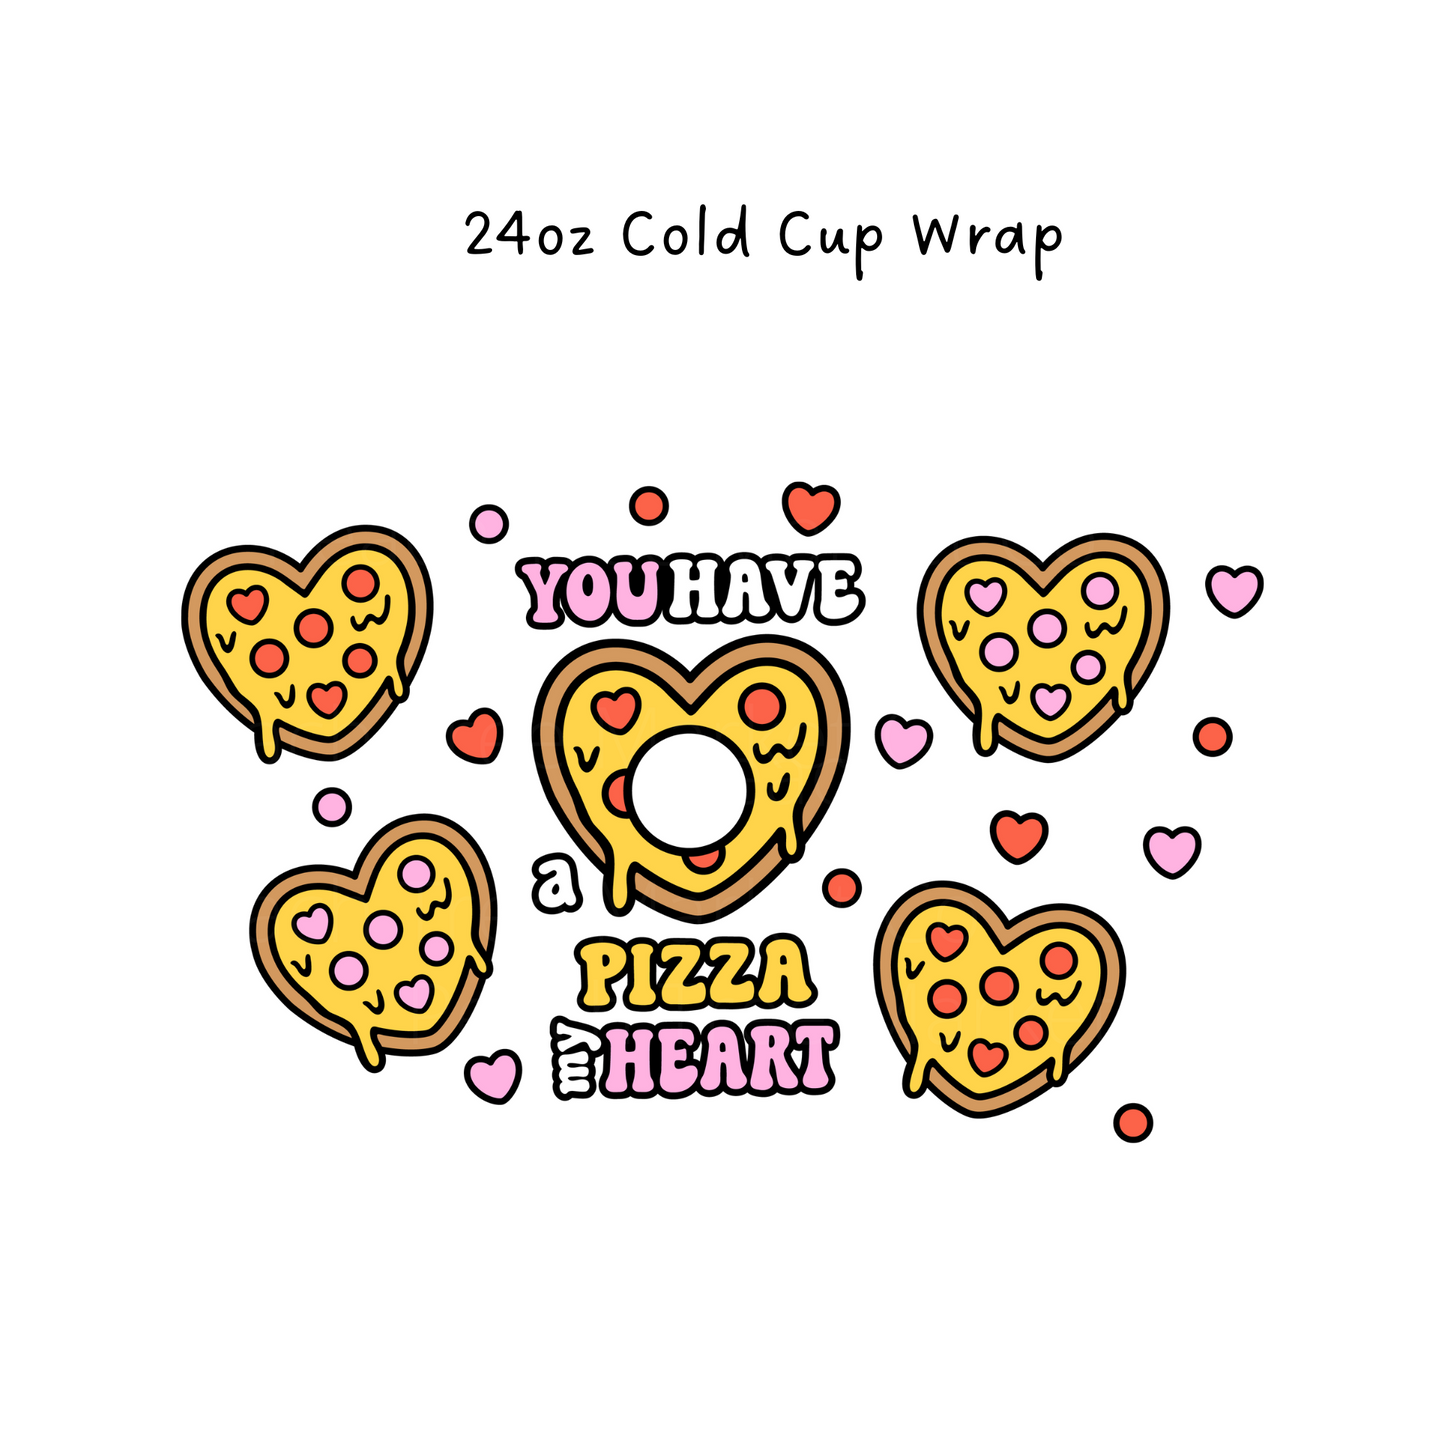 Pizza My Heart  24 OZ Cold Cup Wrap